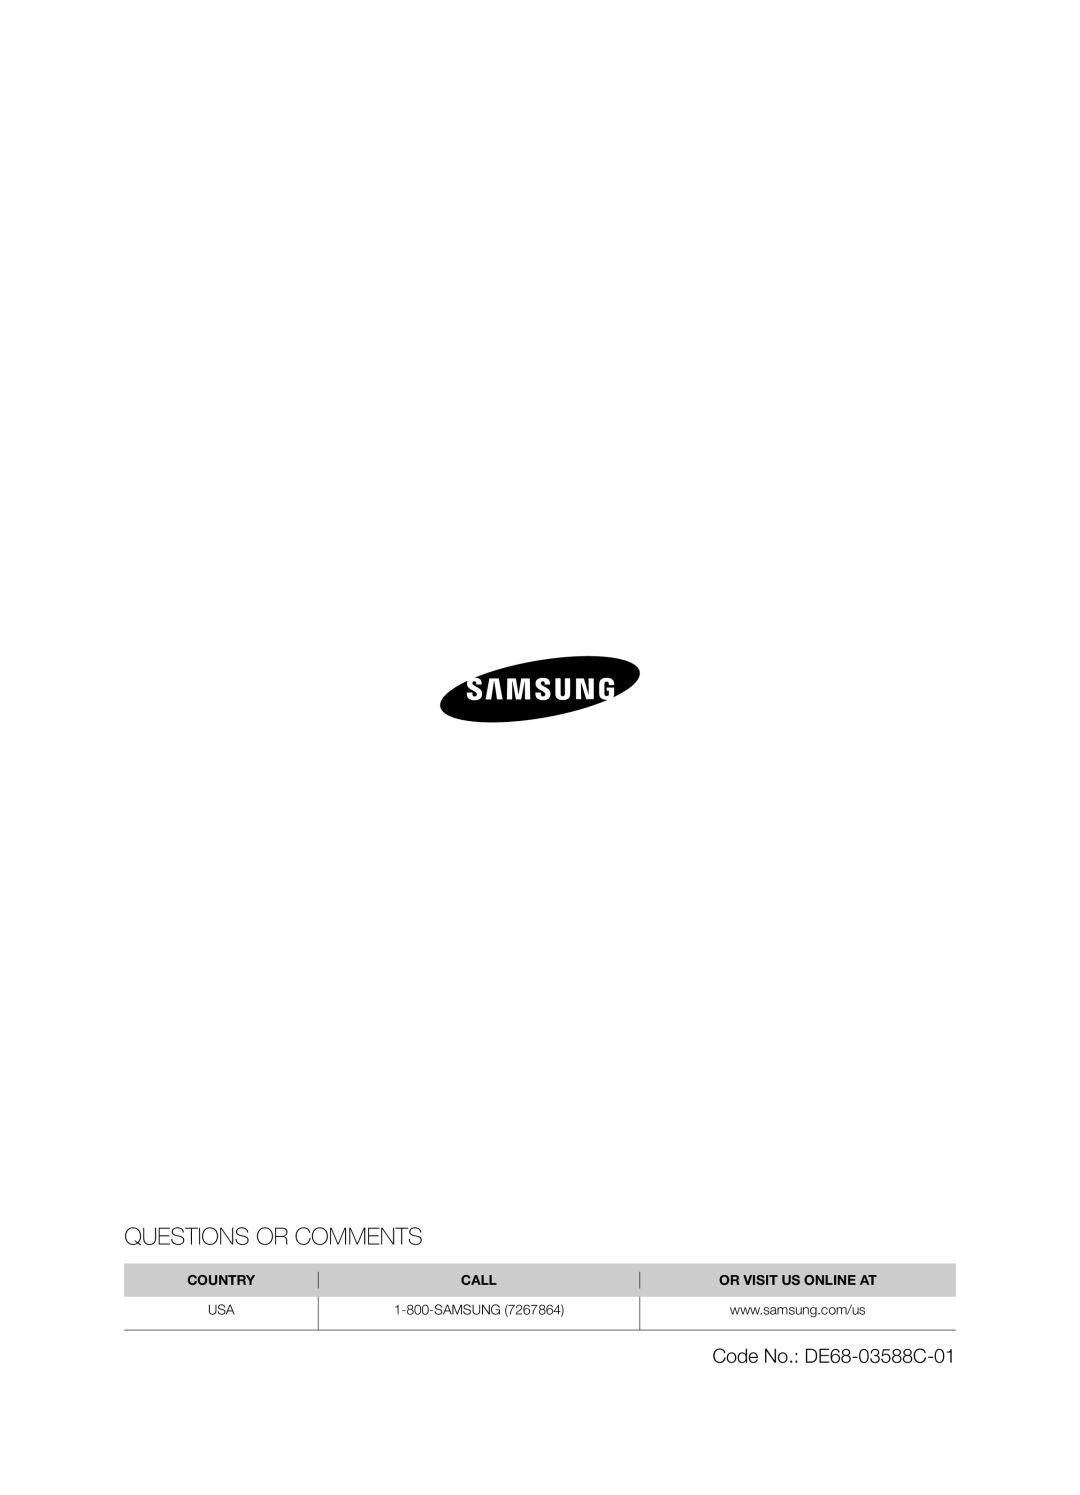 Samsung SMH9151 user manual Questions Or Comments, Code No. DE68-03588C-01, Country, Call, Or Visit Us Online At 